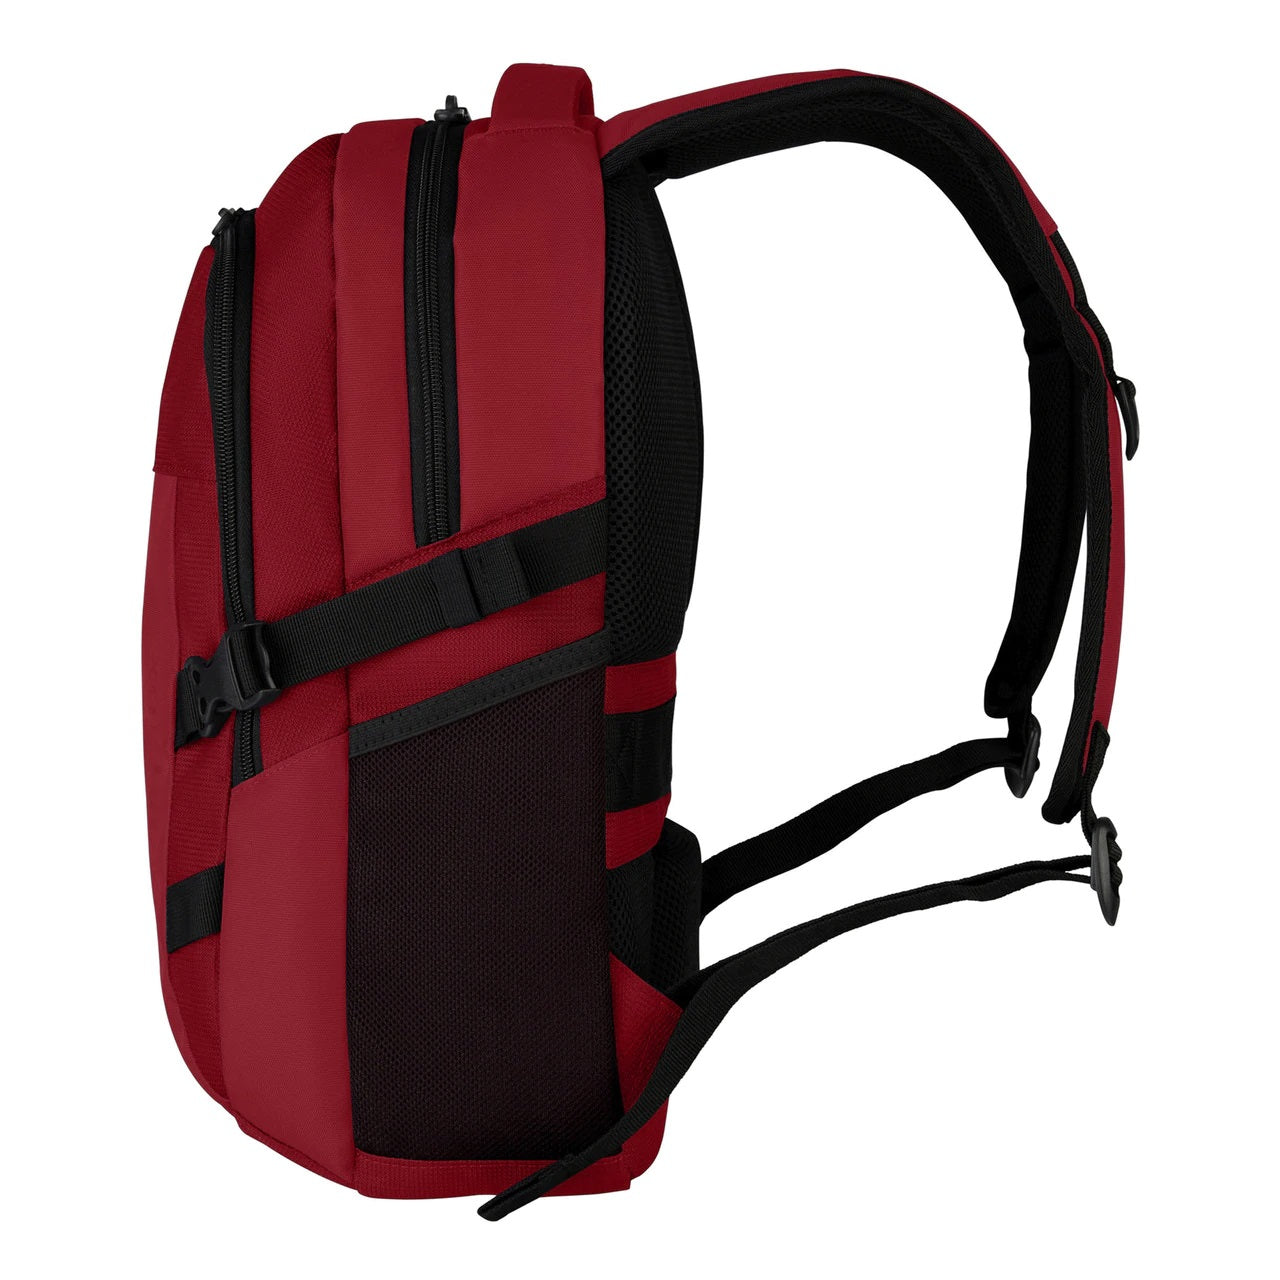 VX Sport EVO Compact Backpack (3 Colours)